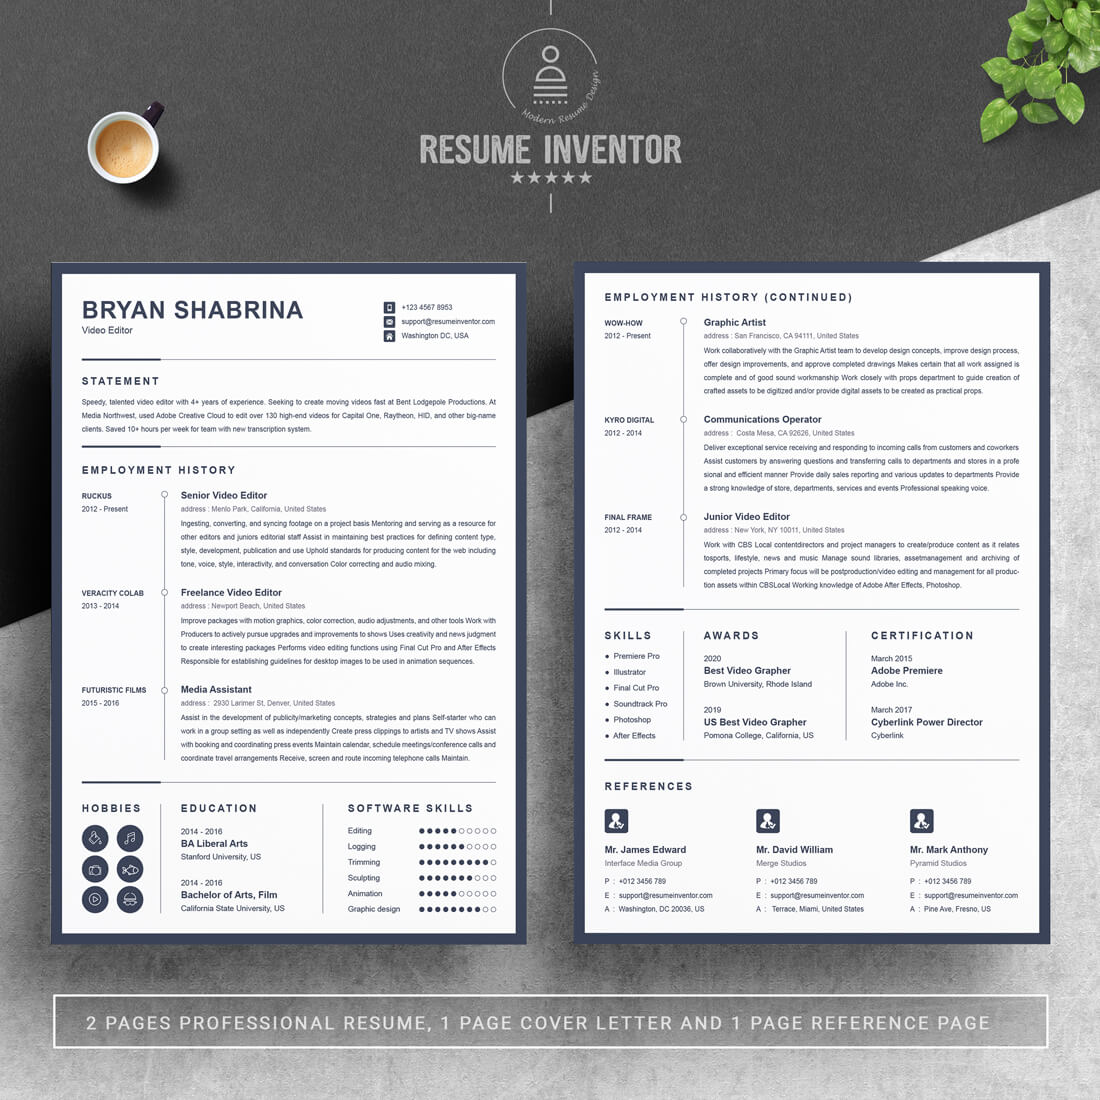 Professional resume template with a blue cover letter.